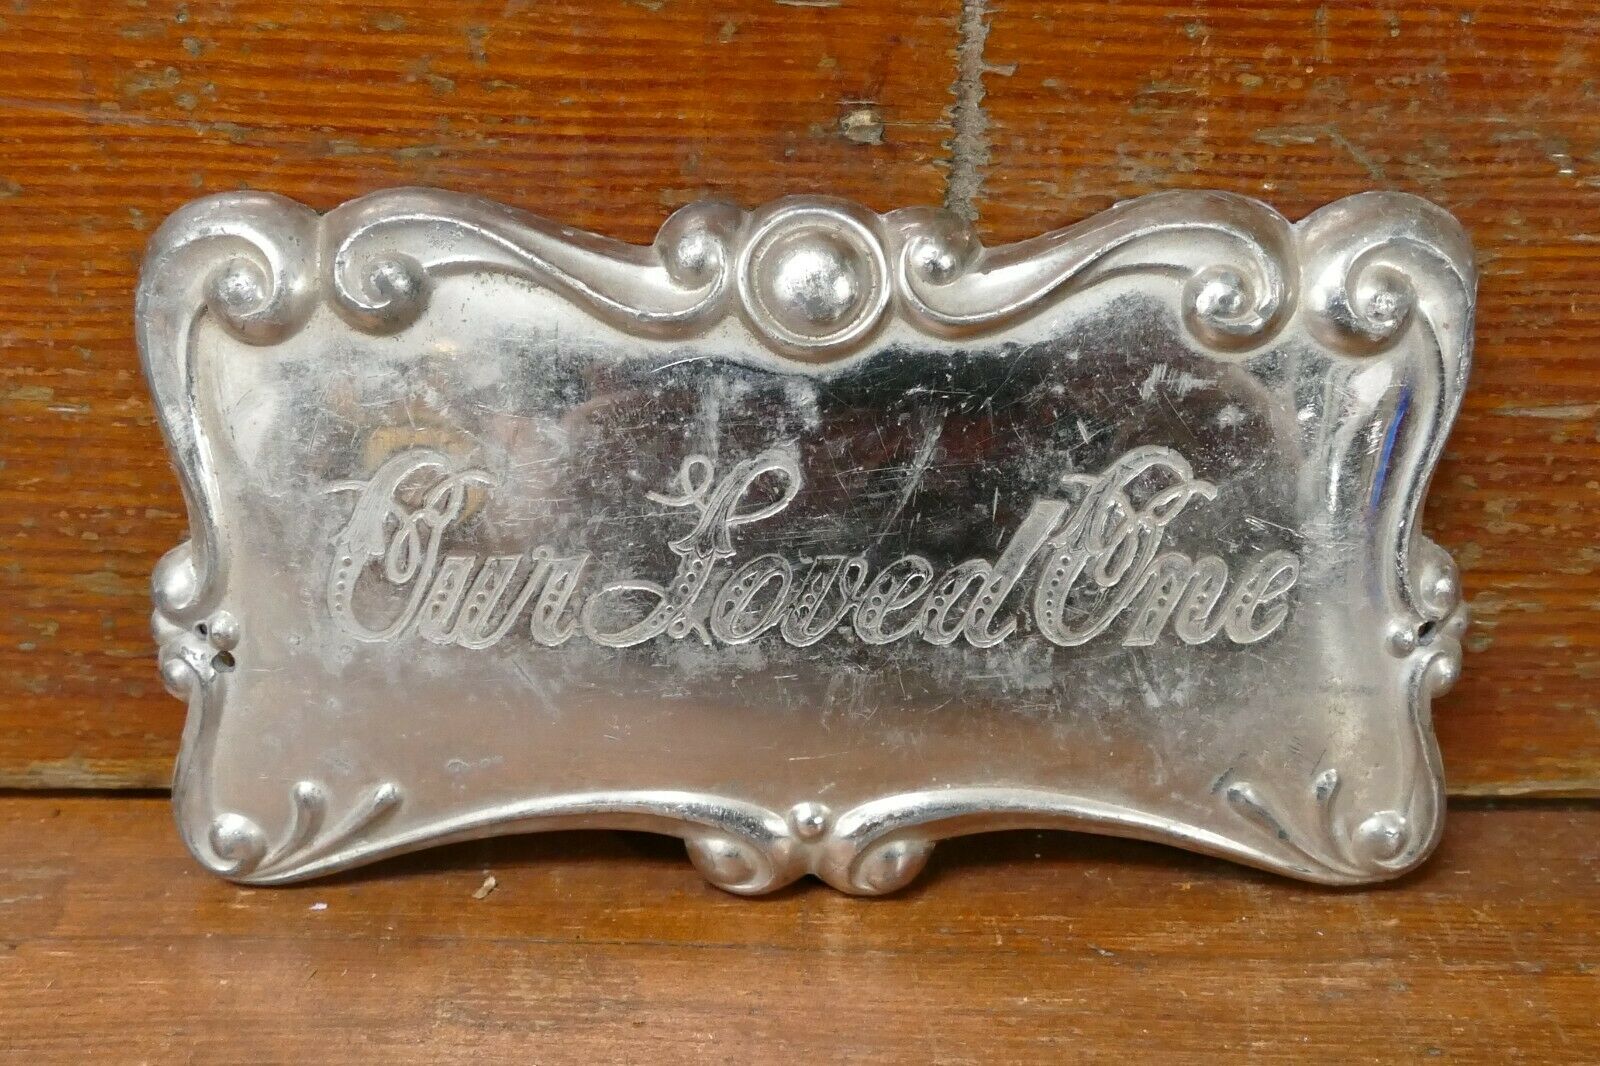 Antique Casket Coffin Funeral Plaque Silver Plated Ornate Our Loved One